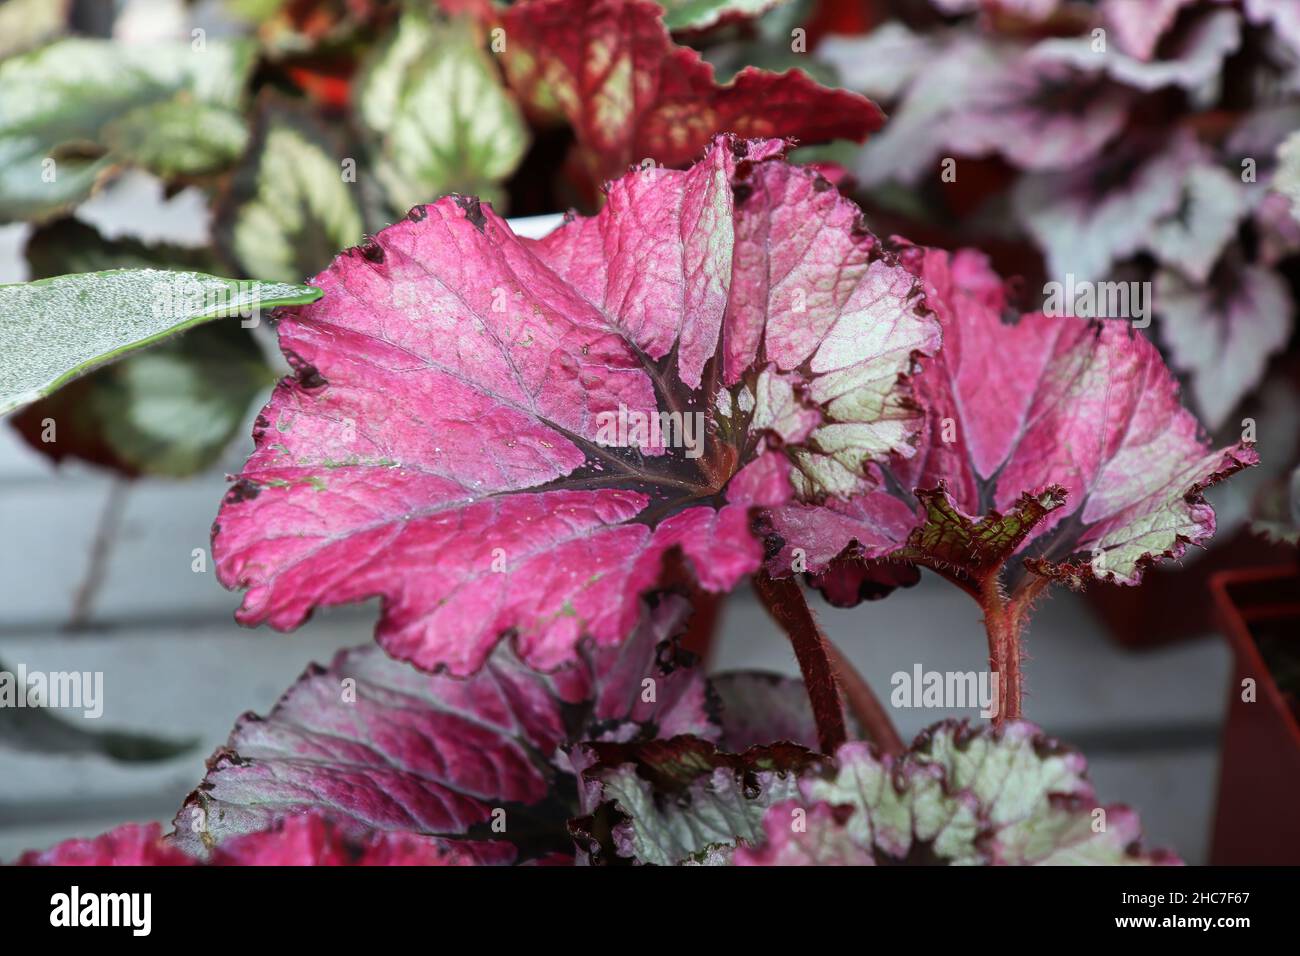 Bright colorful leaves on a Painted Begonia plant Stock Photo